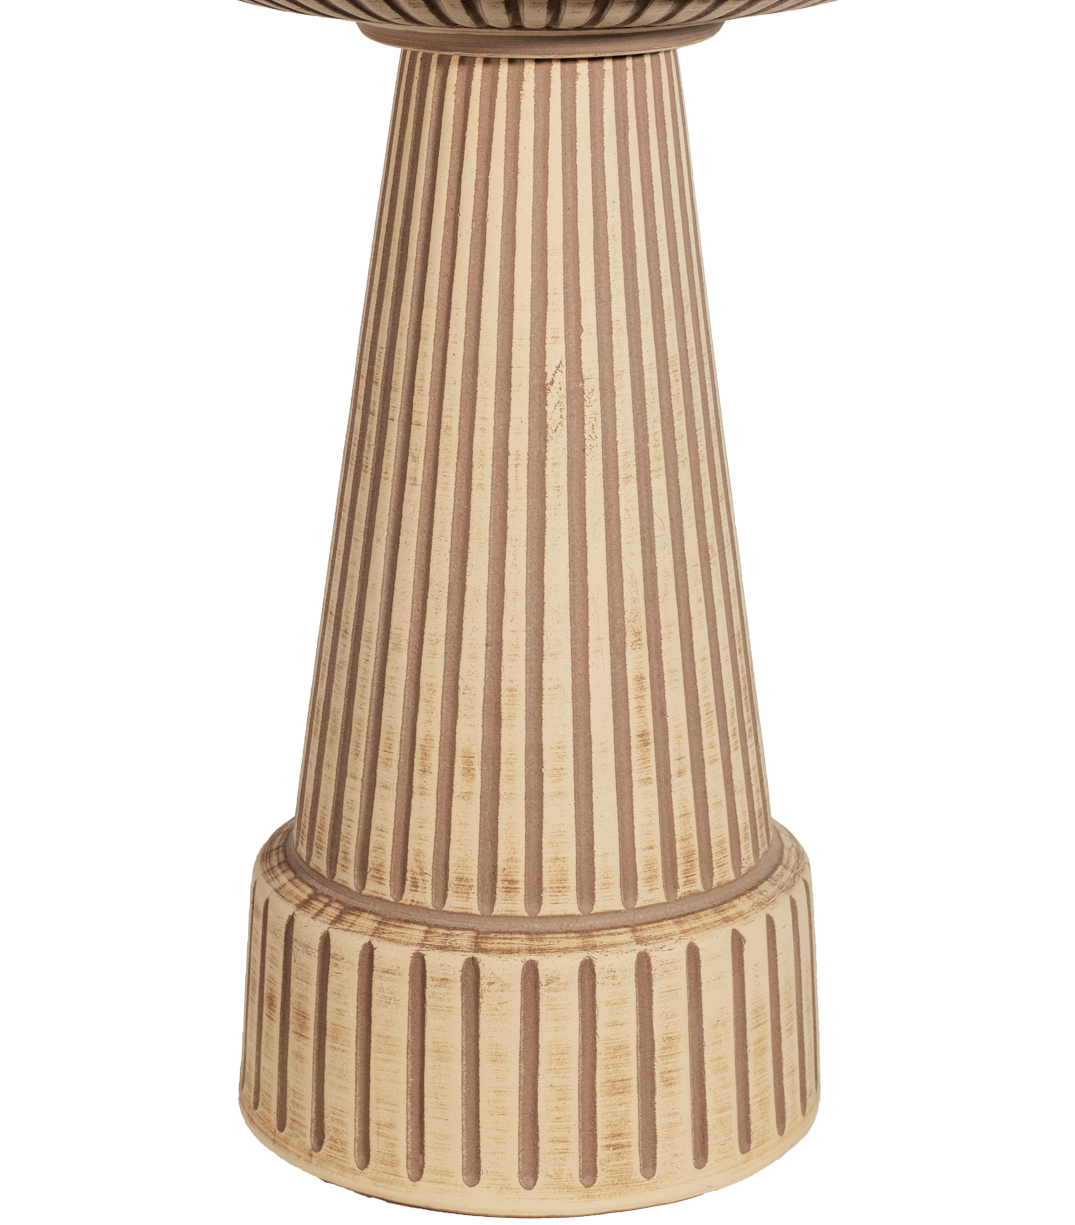 ceramic clay brown stained pedestal with vertical stripes